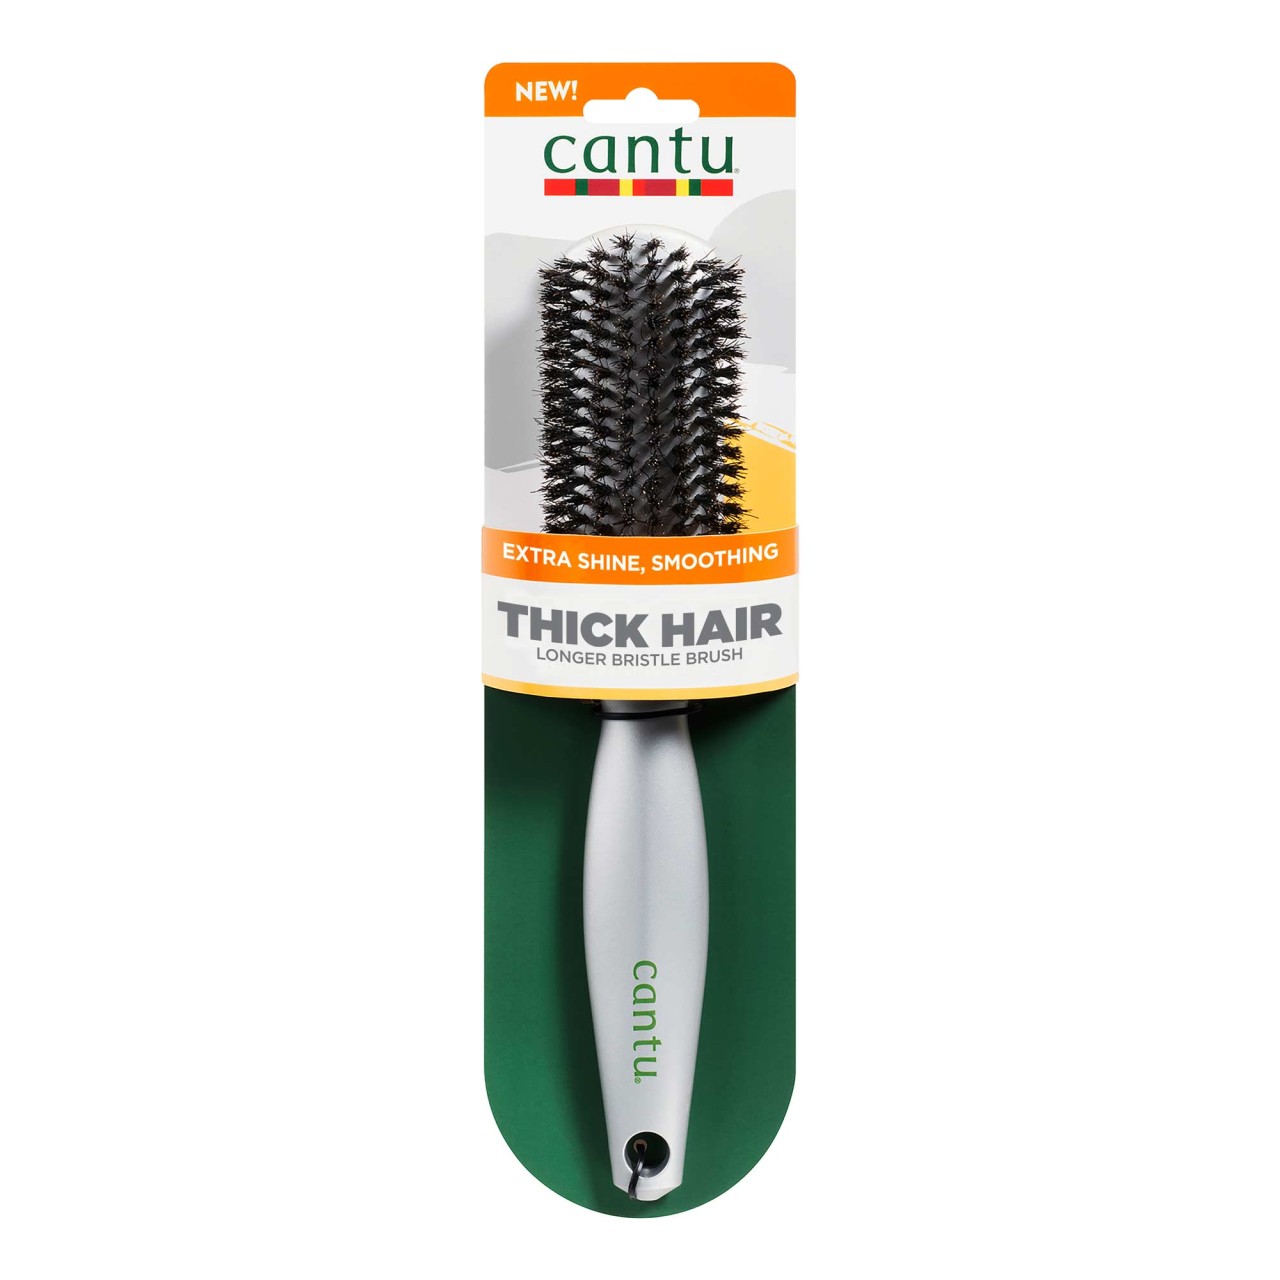 cantu - Smooth Thick Hair Styler - 